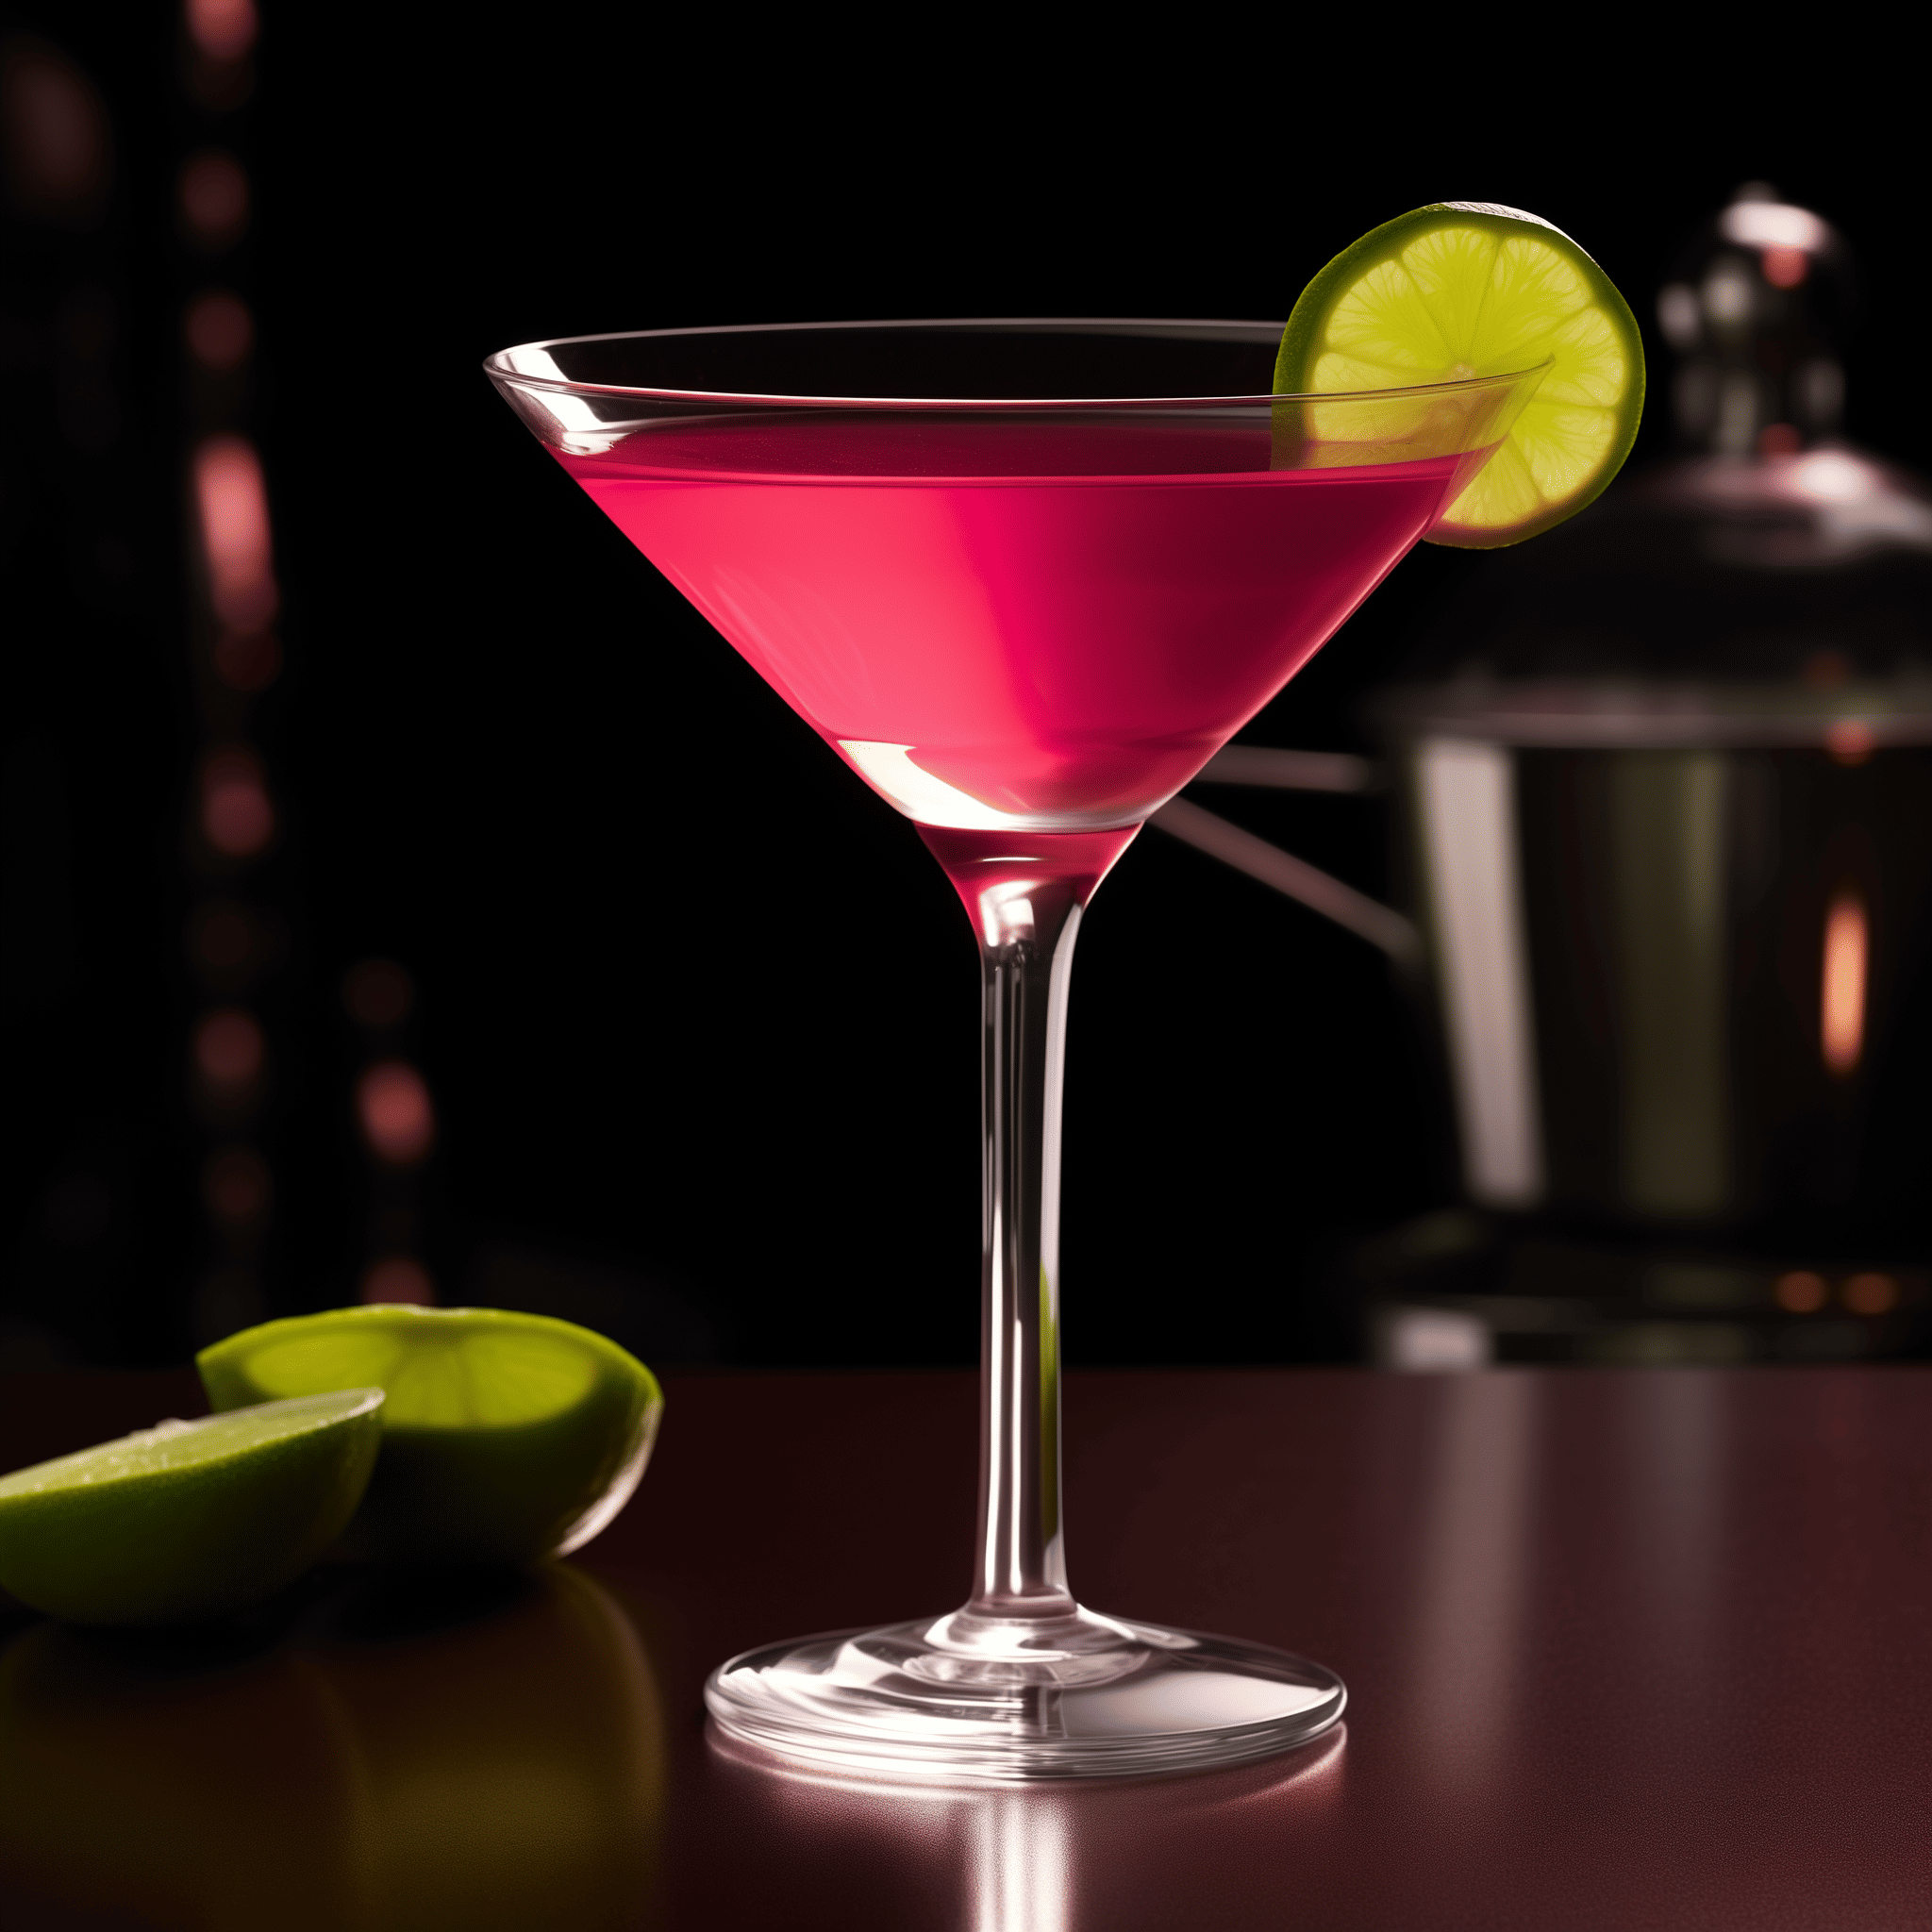 Chambord Cosmopolitan Cocktail Recipe - The Chambord Cosmopolitan offers a harmonious blend of sweet, tart, and citrus flavors. The Chambord introduces a velvety raspberry undertone, while the cranberry juice provides a sharp contrast. The orange liqueur adds a zesty sweetness, and the vodka gives it a clean, strong backbone.